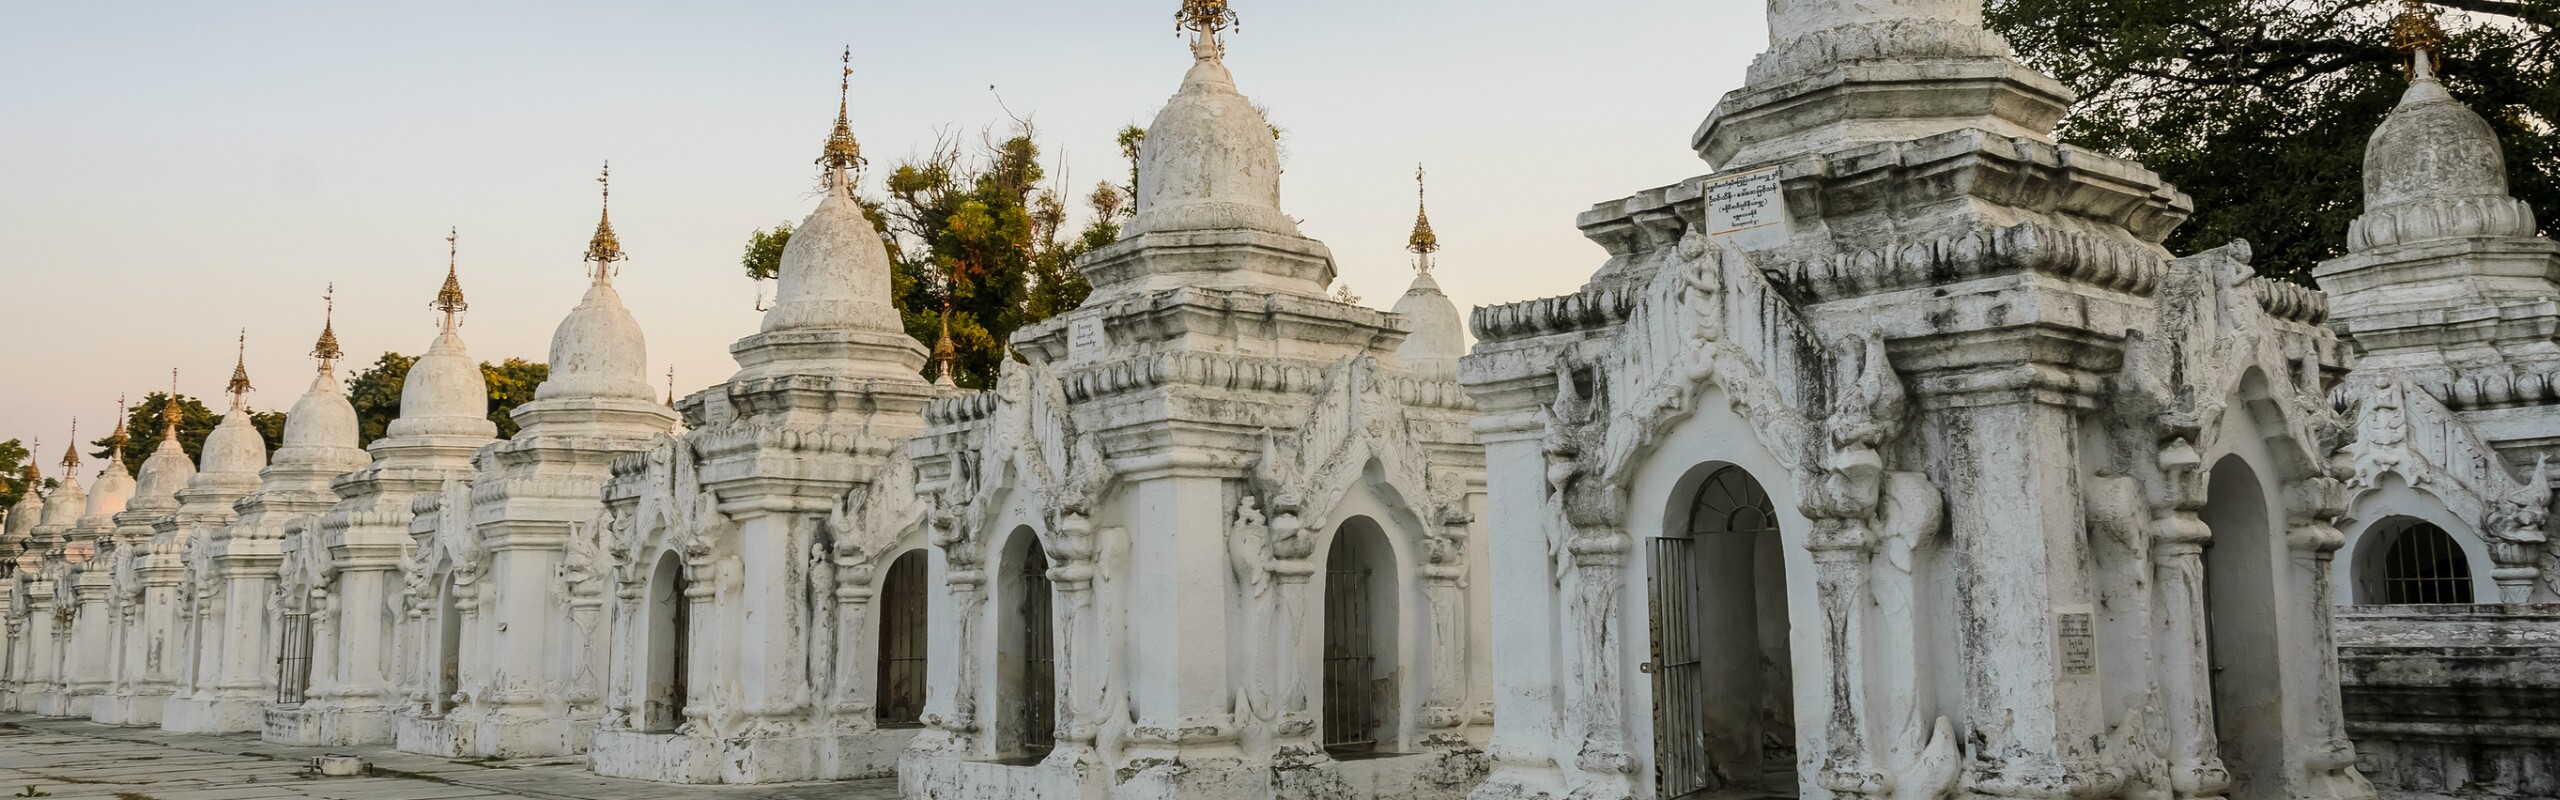 Top 9 Attractions in Mandalay - Peruse the World's Largest Book